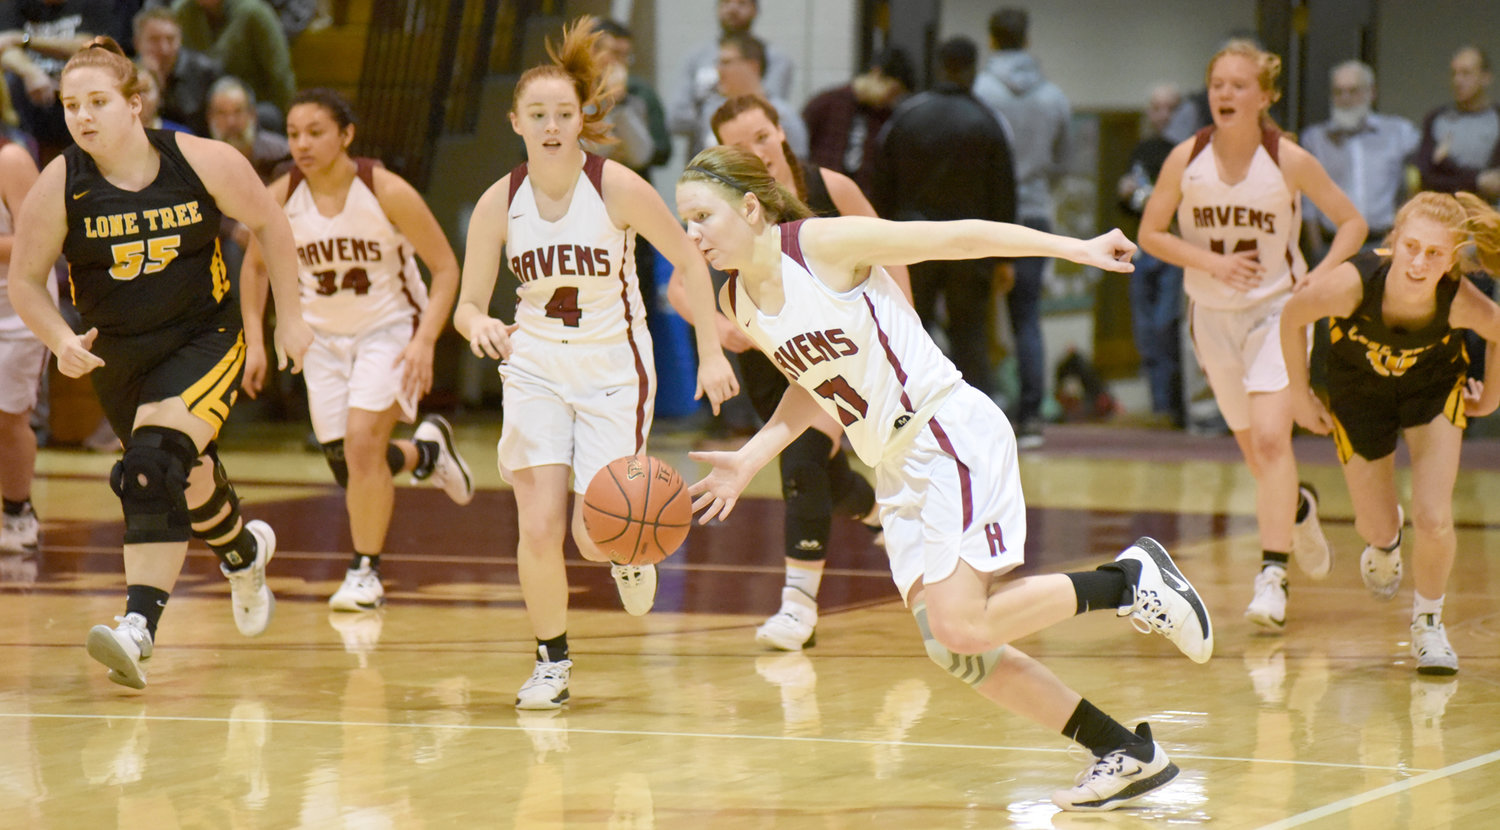 Hillcrest’s Esther Hughes gets a fast break against Lone Tree on Jan. 14.